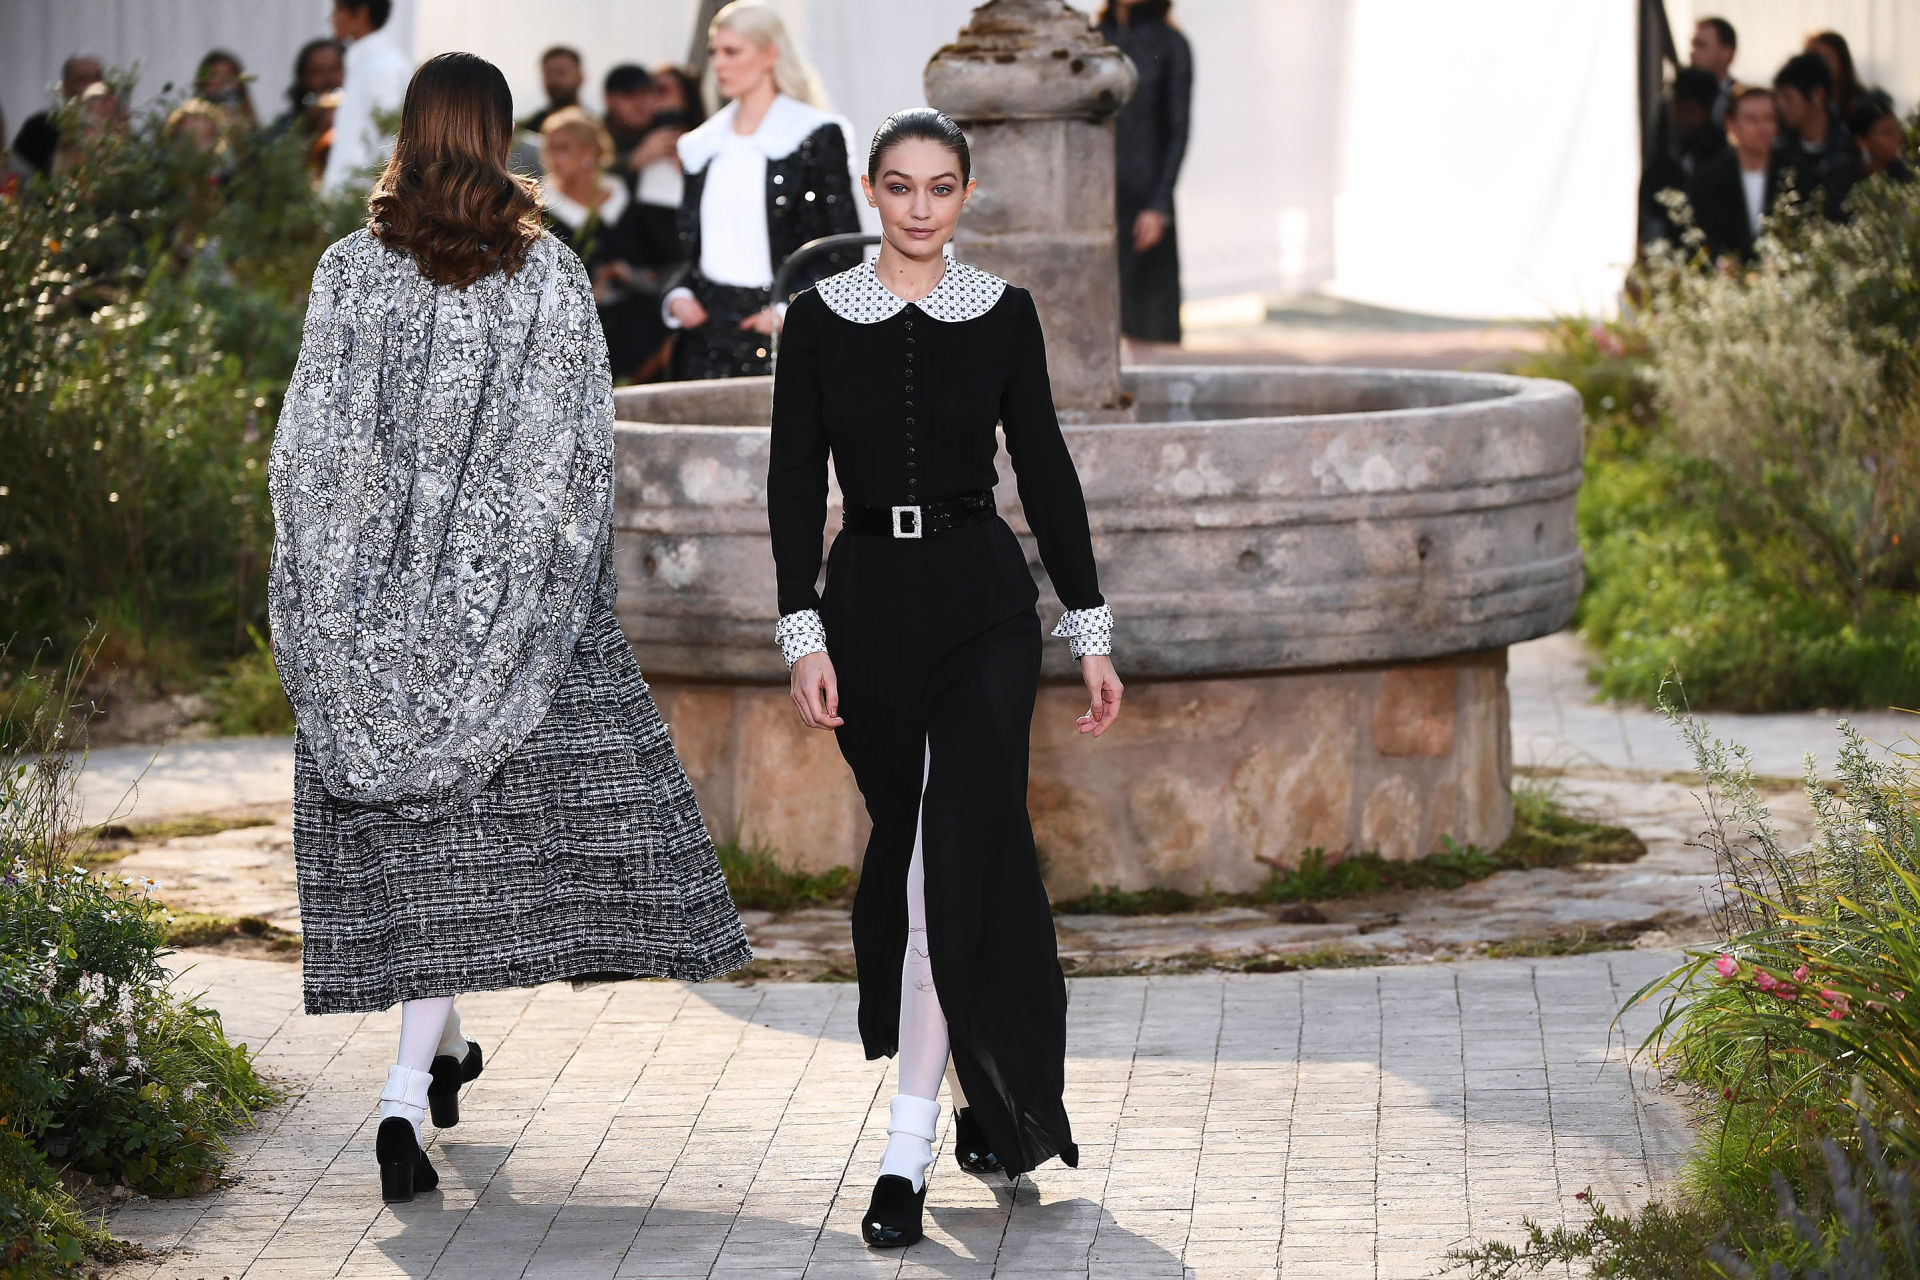 Chanel's latest show is inspired by Coco Chanel's childhood orphanage